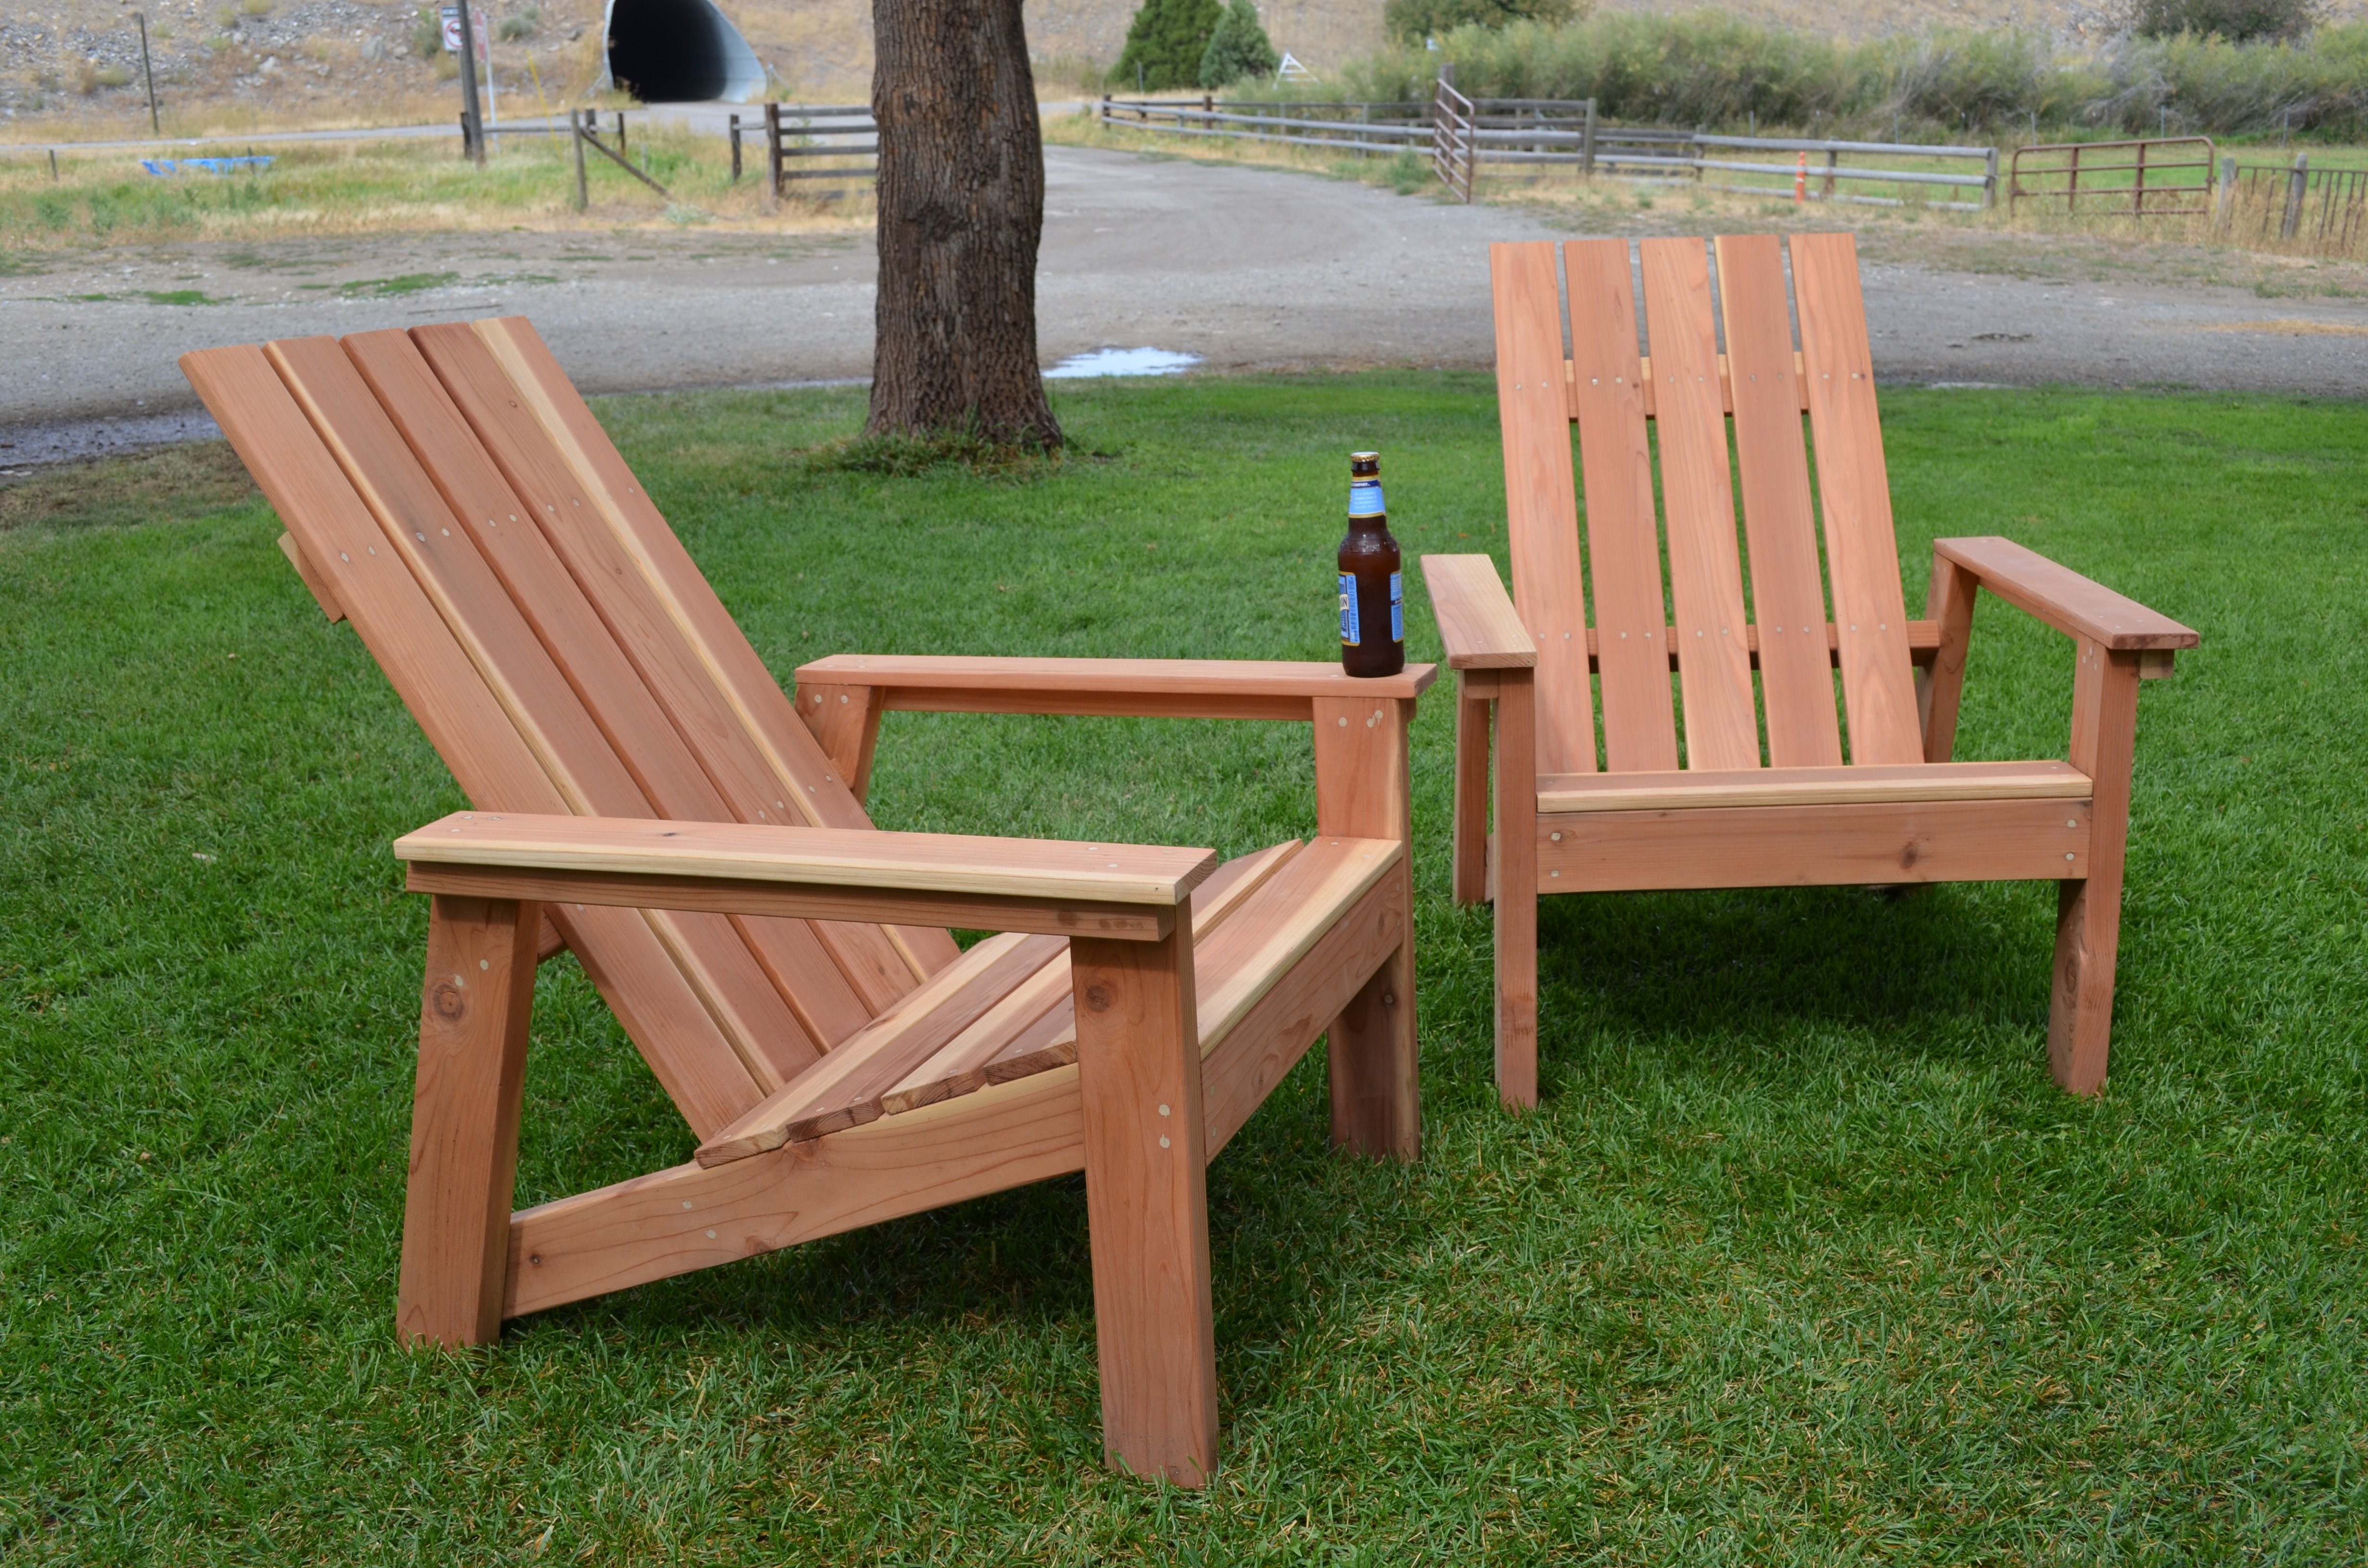 First Build - Redwood Adirondack Chairs | Do It Yourself Home Projects 